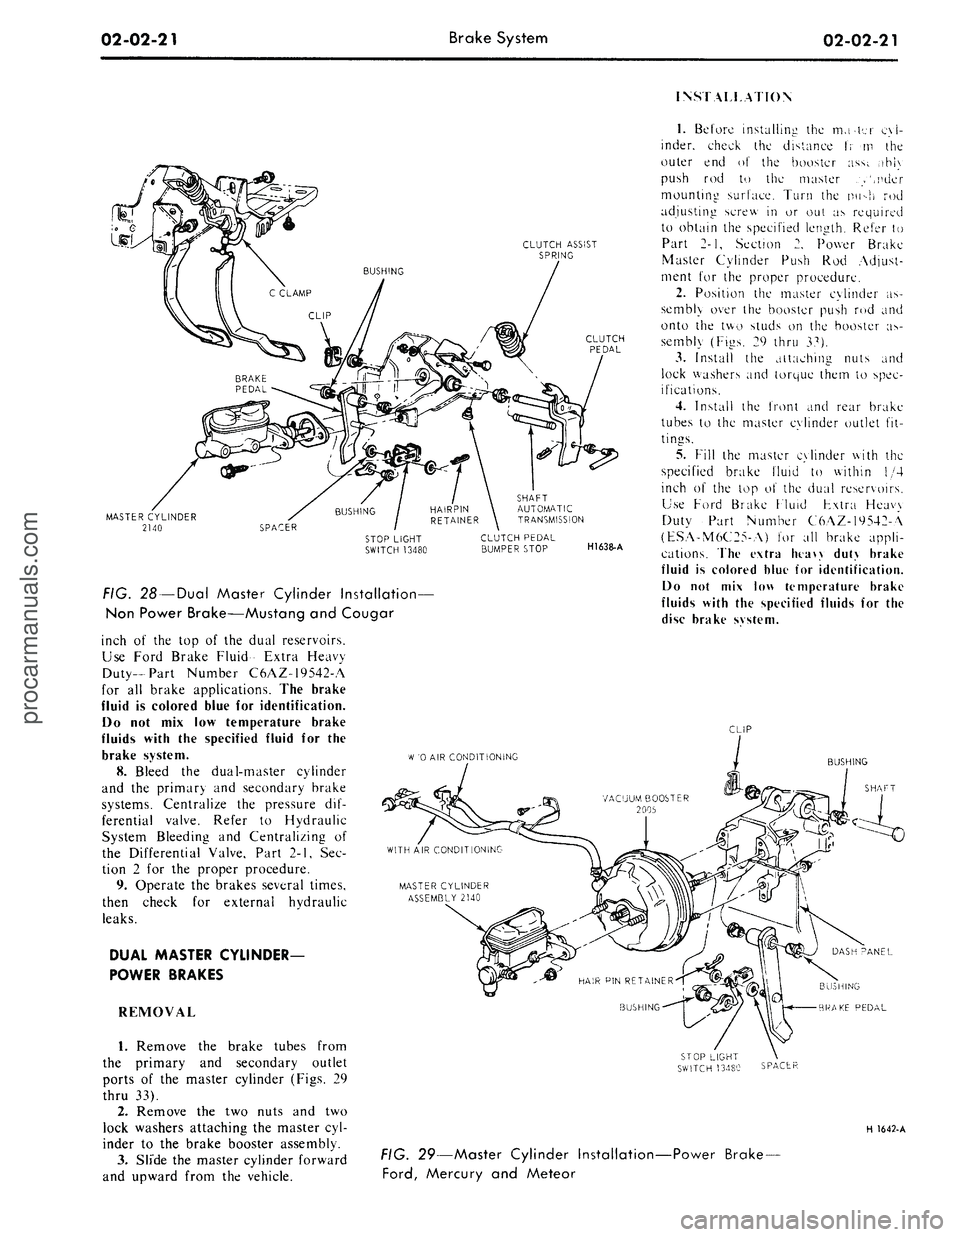 FORD MUSTANG 1969  Volume One Chassis 
02-02-21 
Brake System

02-02-21

INSTALLATION

CLUTCH ASSIST

SPRING

MASTER CYLINDER

2140

FIG. 28 —Dual Master Cylinder Installation—

Non Power Brake—Mustang and Cougar

inch of the top of